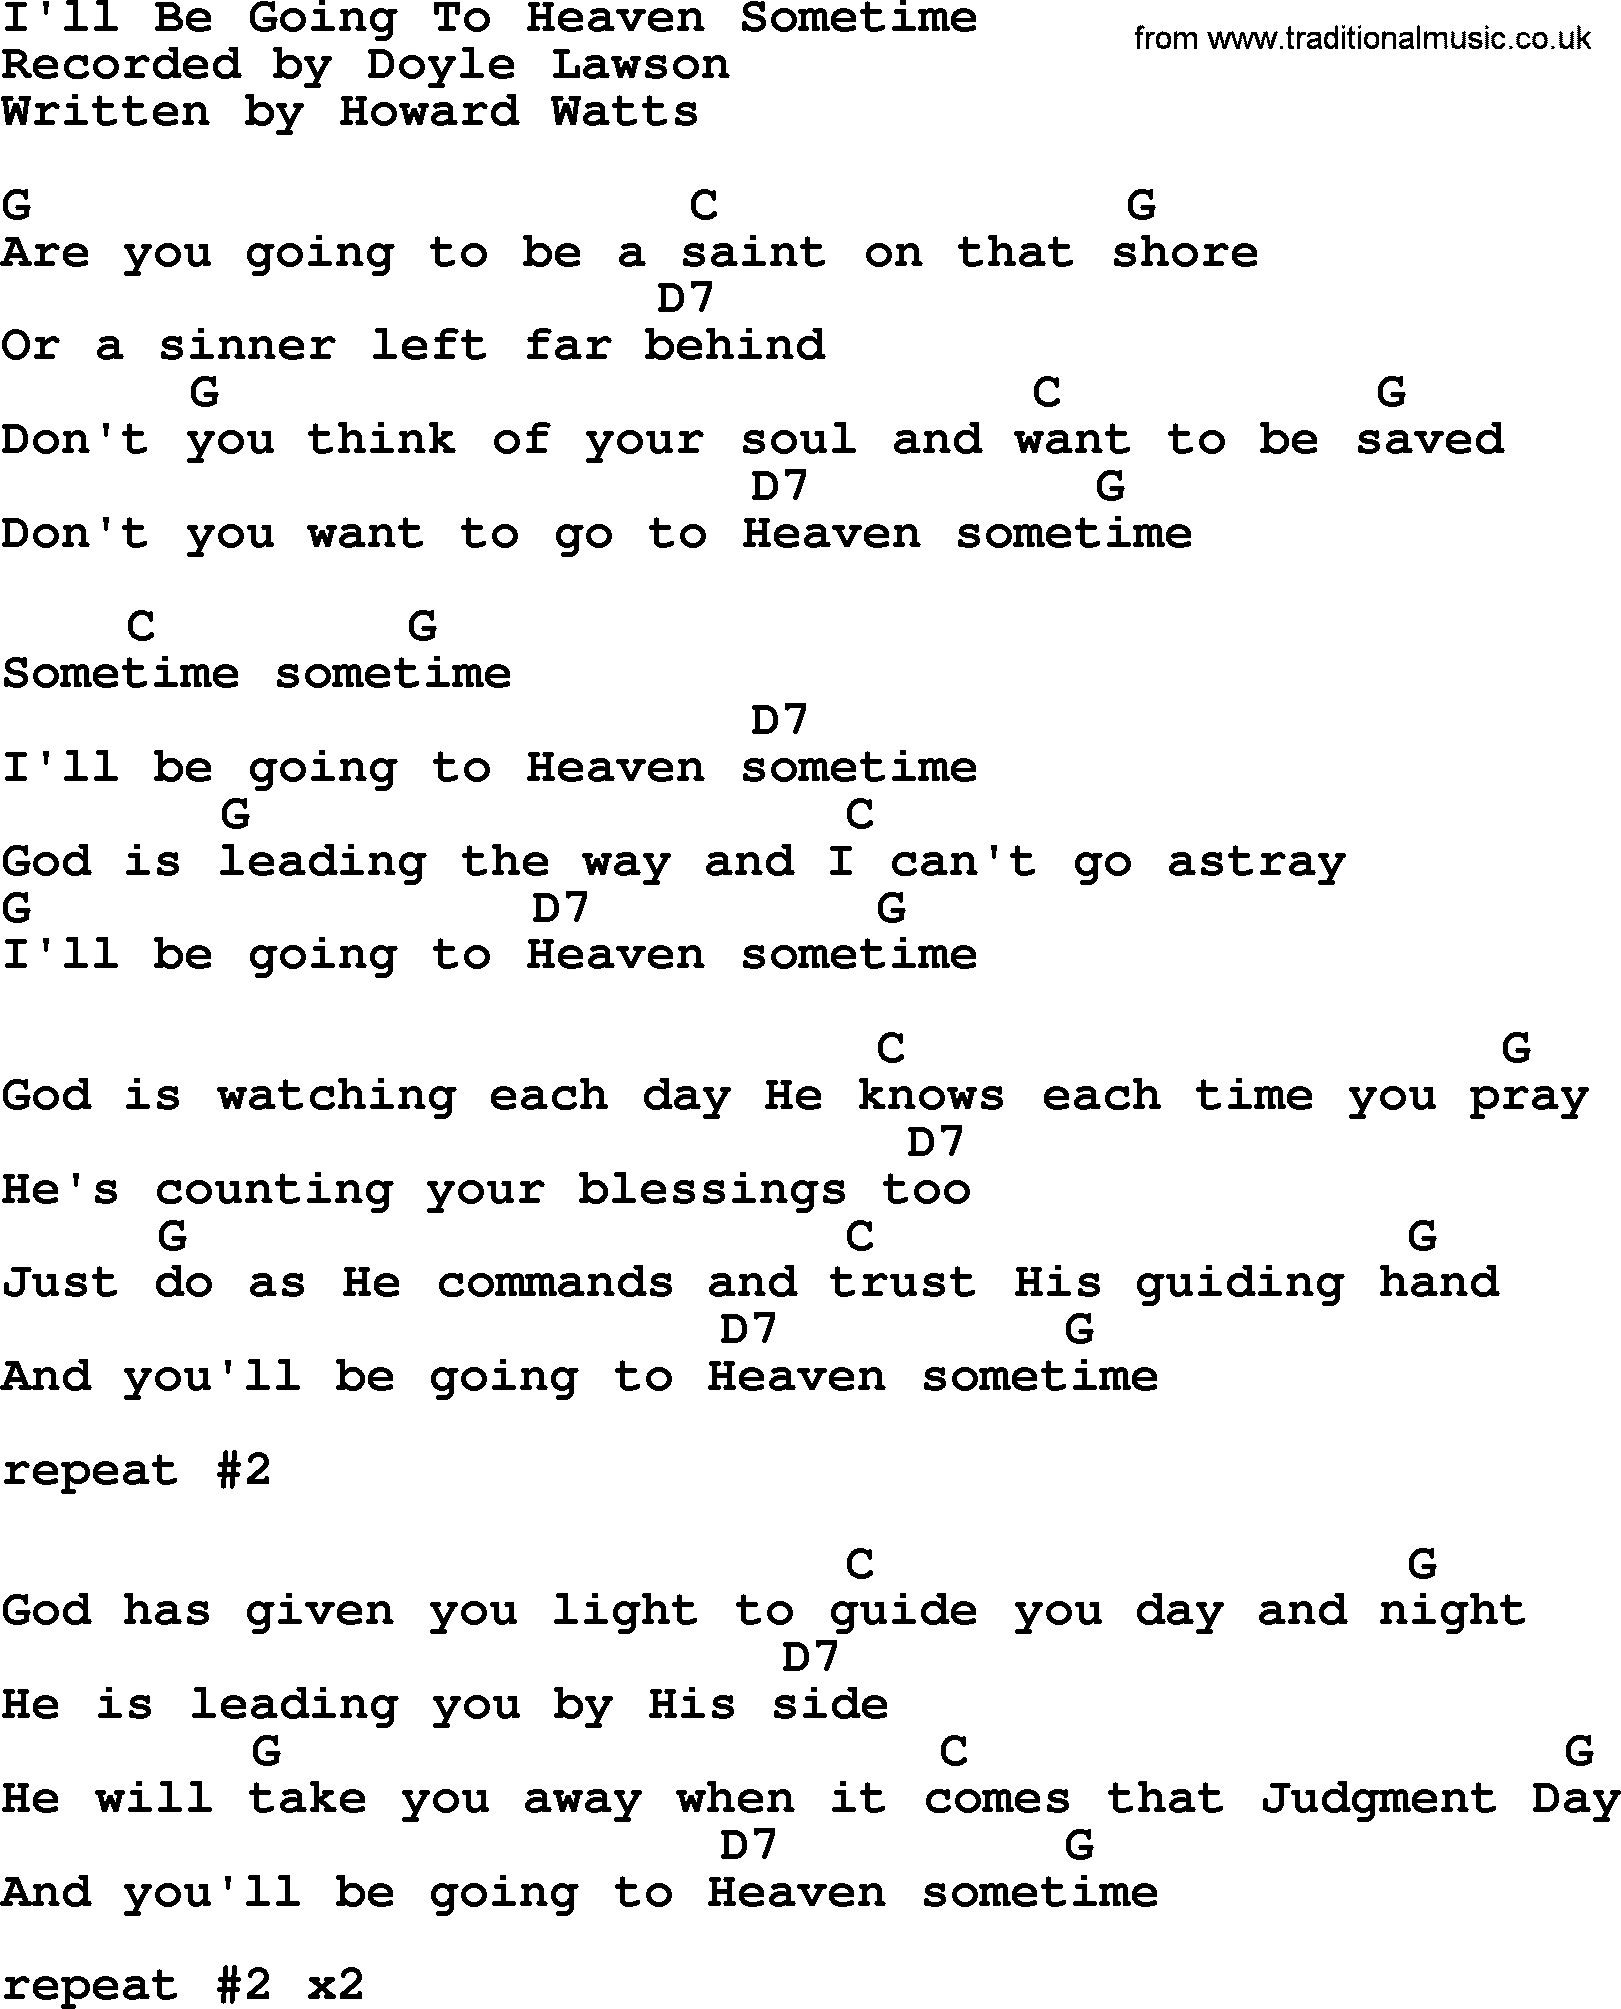 Bluegrass song: I'll Be Going To Heaven Sometime, lyrics and chords